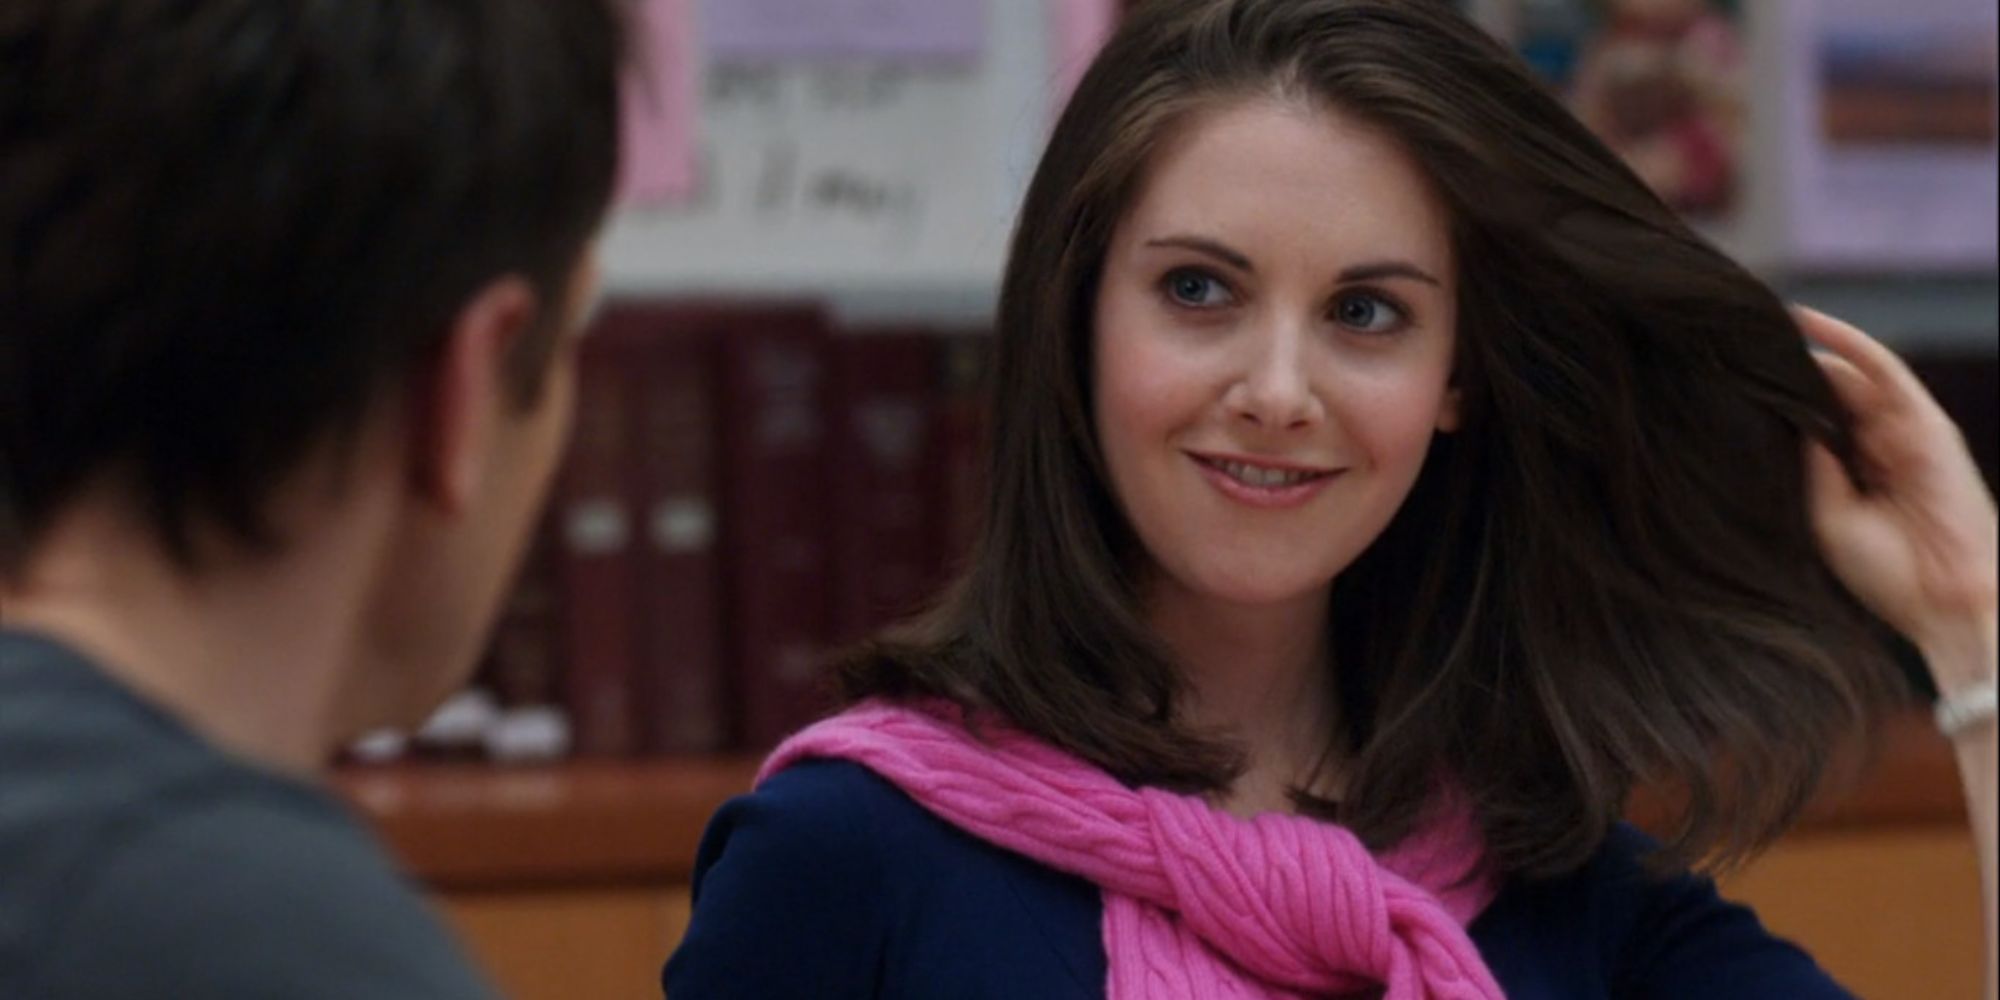 Annie Edison (Alison Brie) from Community flaunting her hair in front of Jeff Winger (Joel McHale)